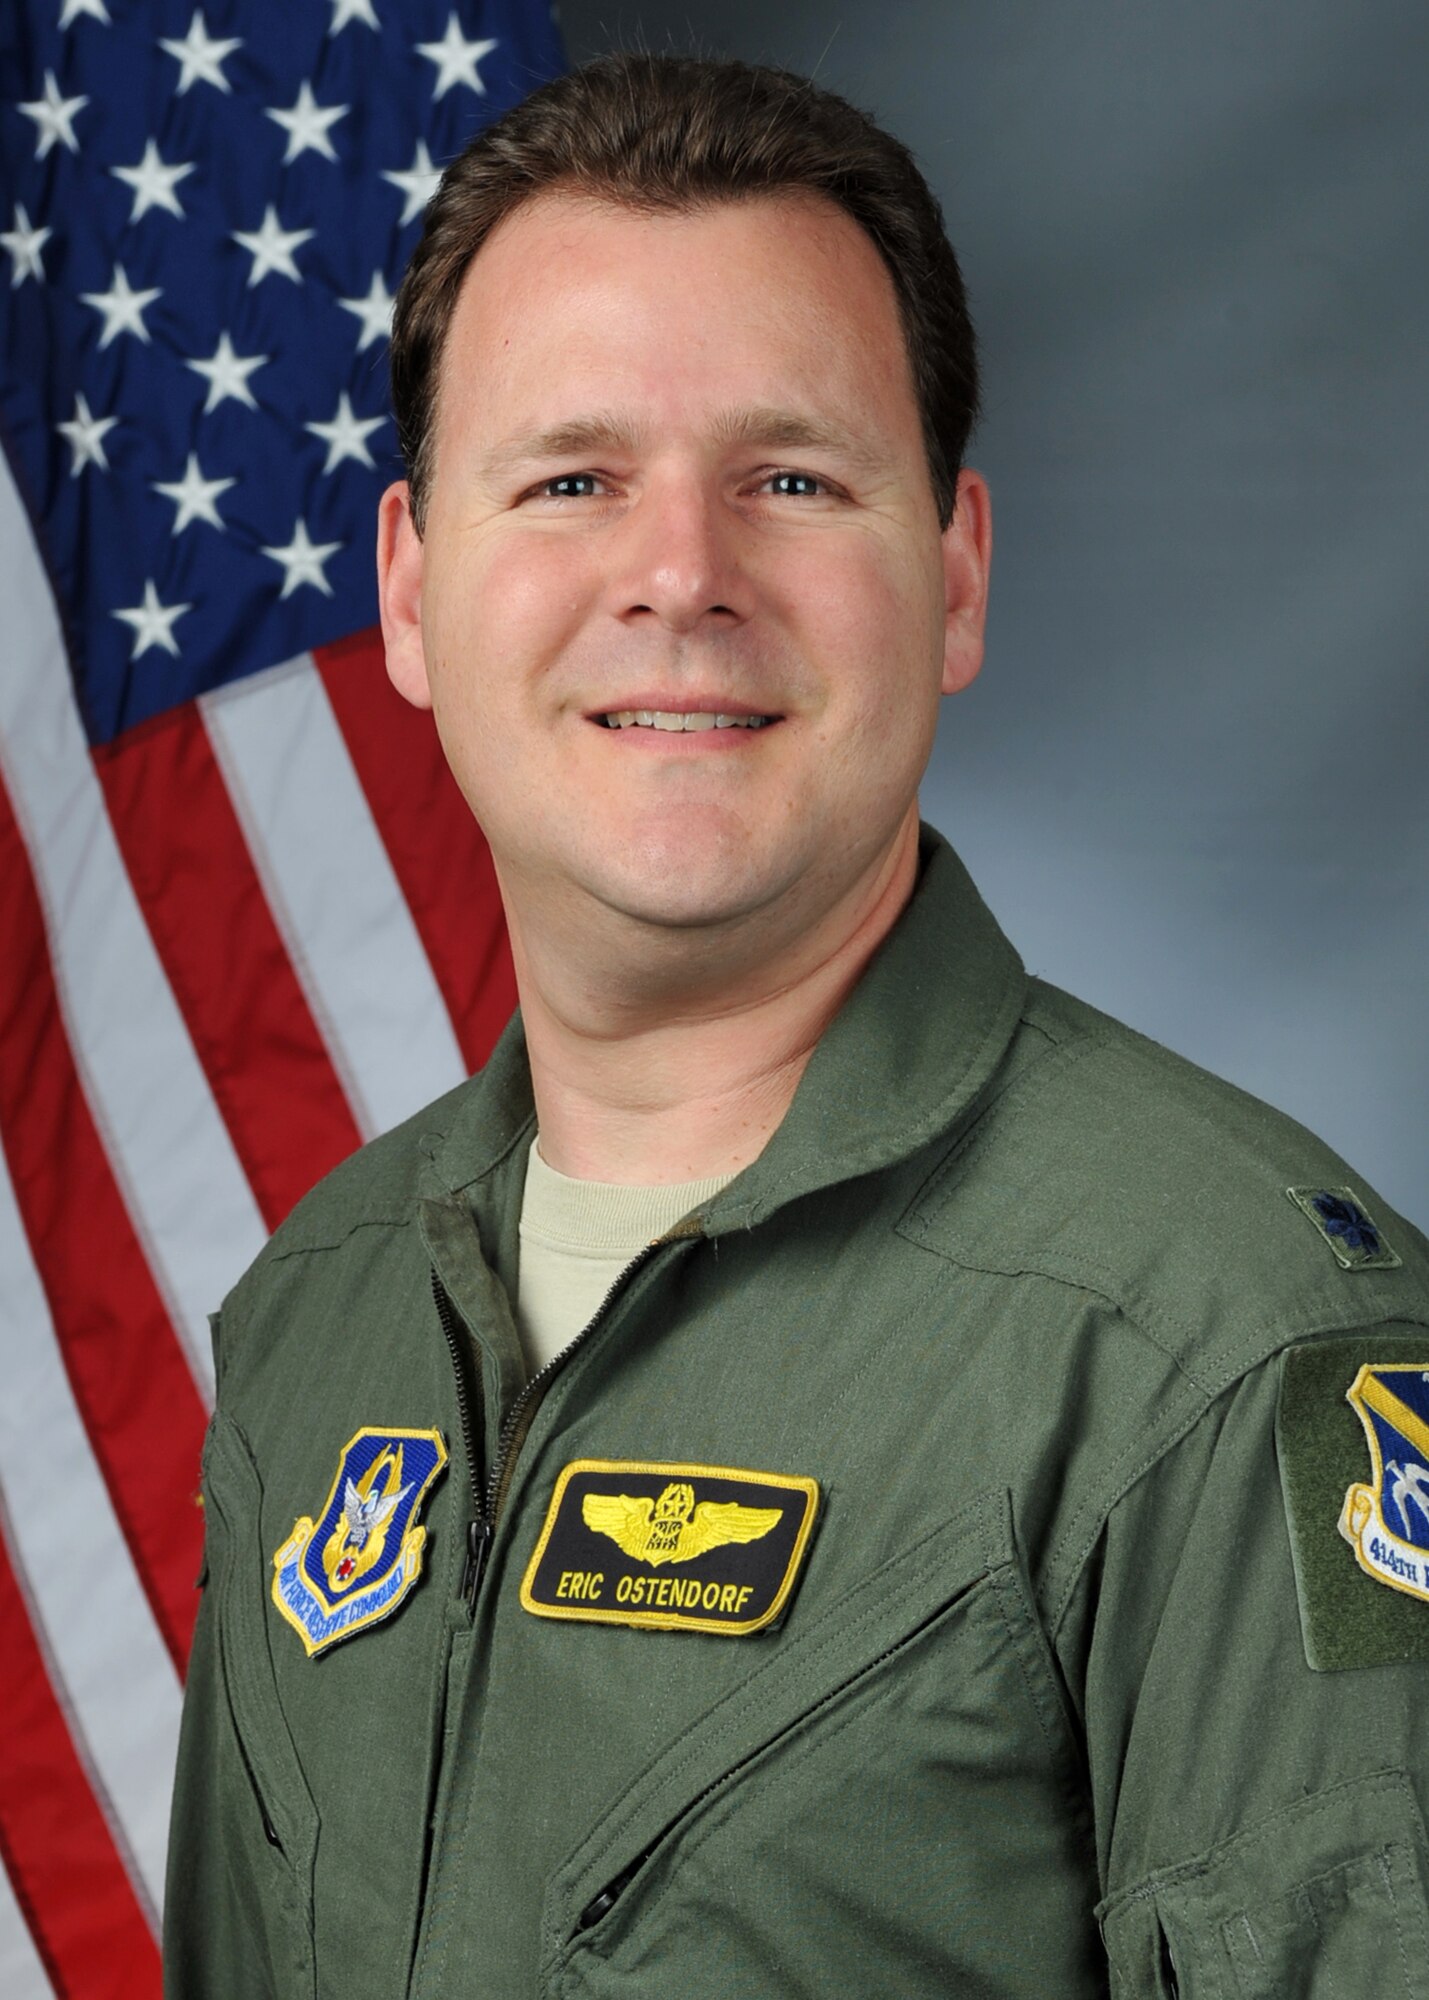 Lt. Col. Eric “Dorf” Ostendorf, 307th Fighter Squadron instructor pilot and special assistant to the commander, stamped his name in the record book for reaching 4,000 flying hours in the F-15E Strike Eagle at Seymour Johnson Air Force, North Carolina.